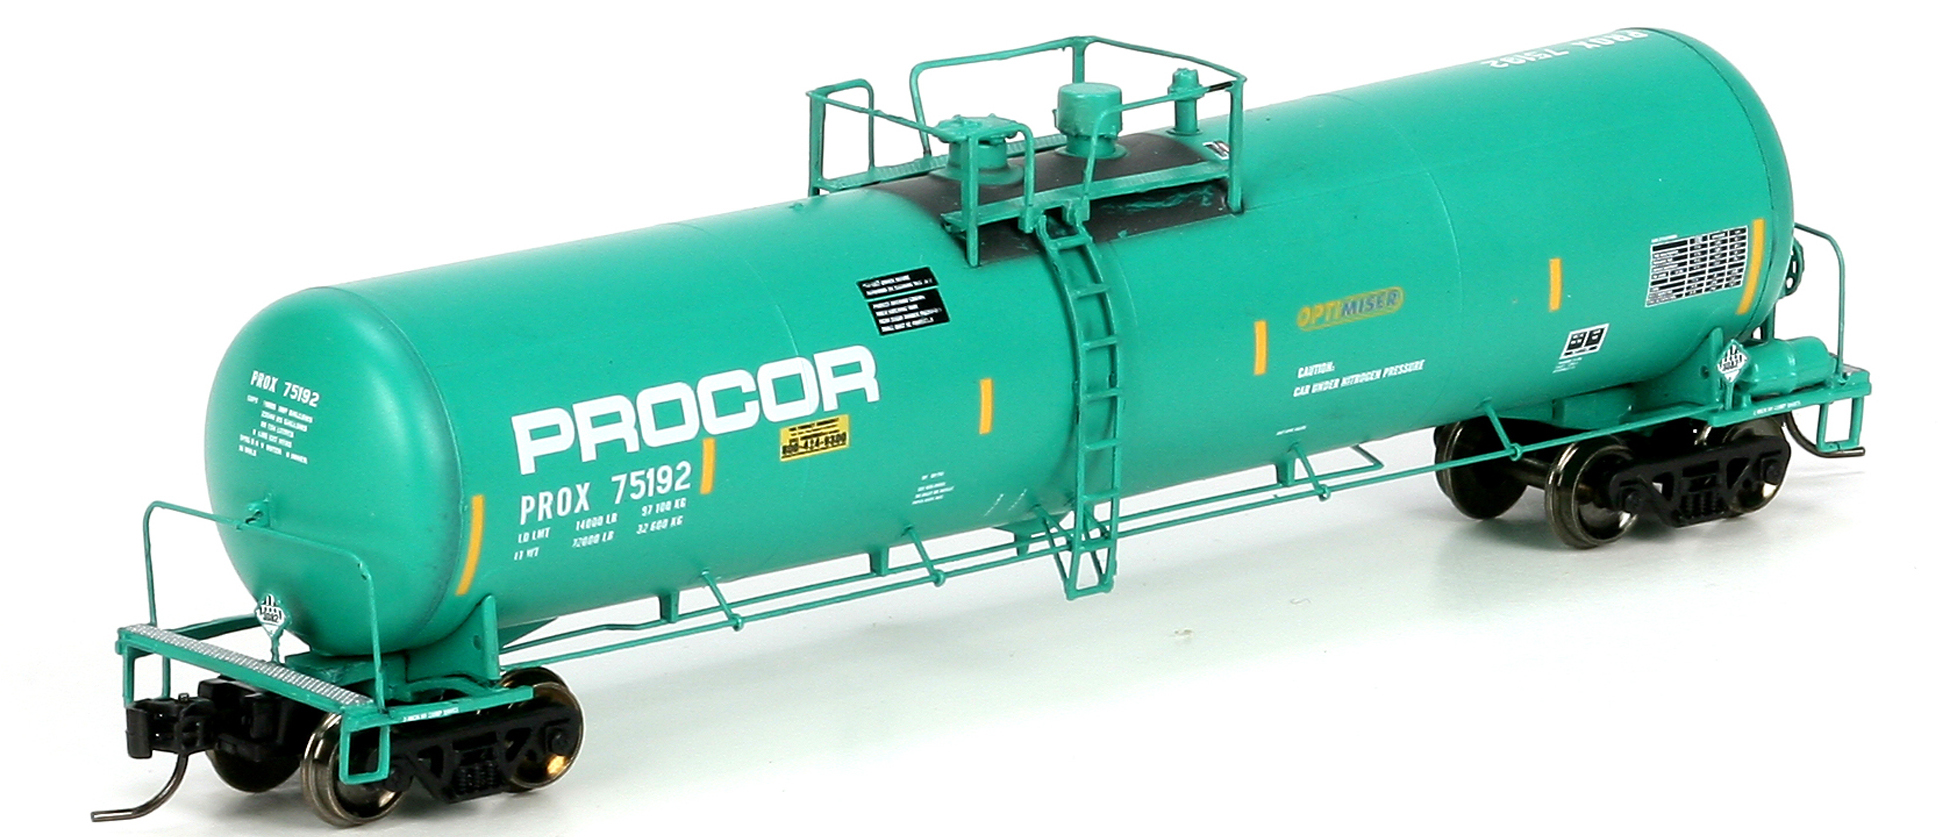 Athearn Dow DOWX 20k Gallon Potassium Chloride Solution Tank Car 12211 N Scale for sale online